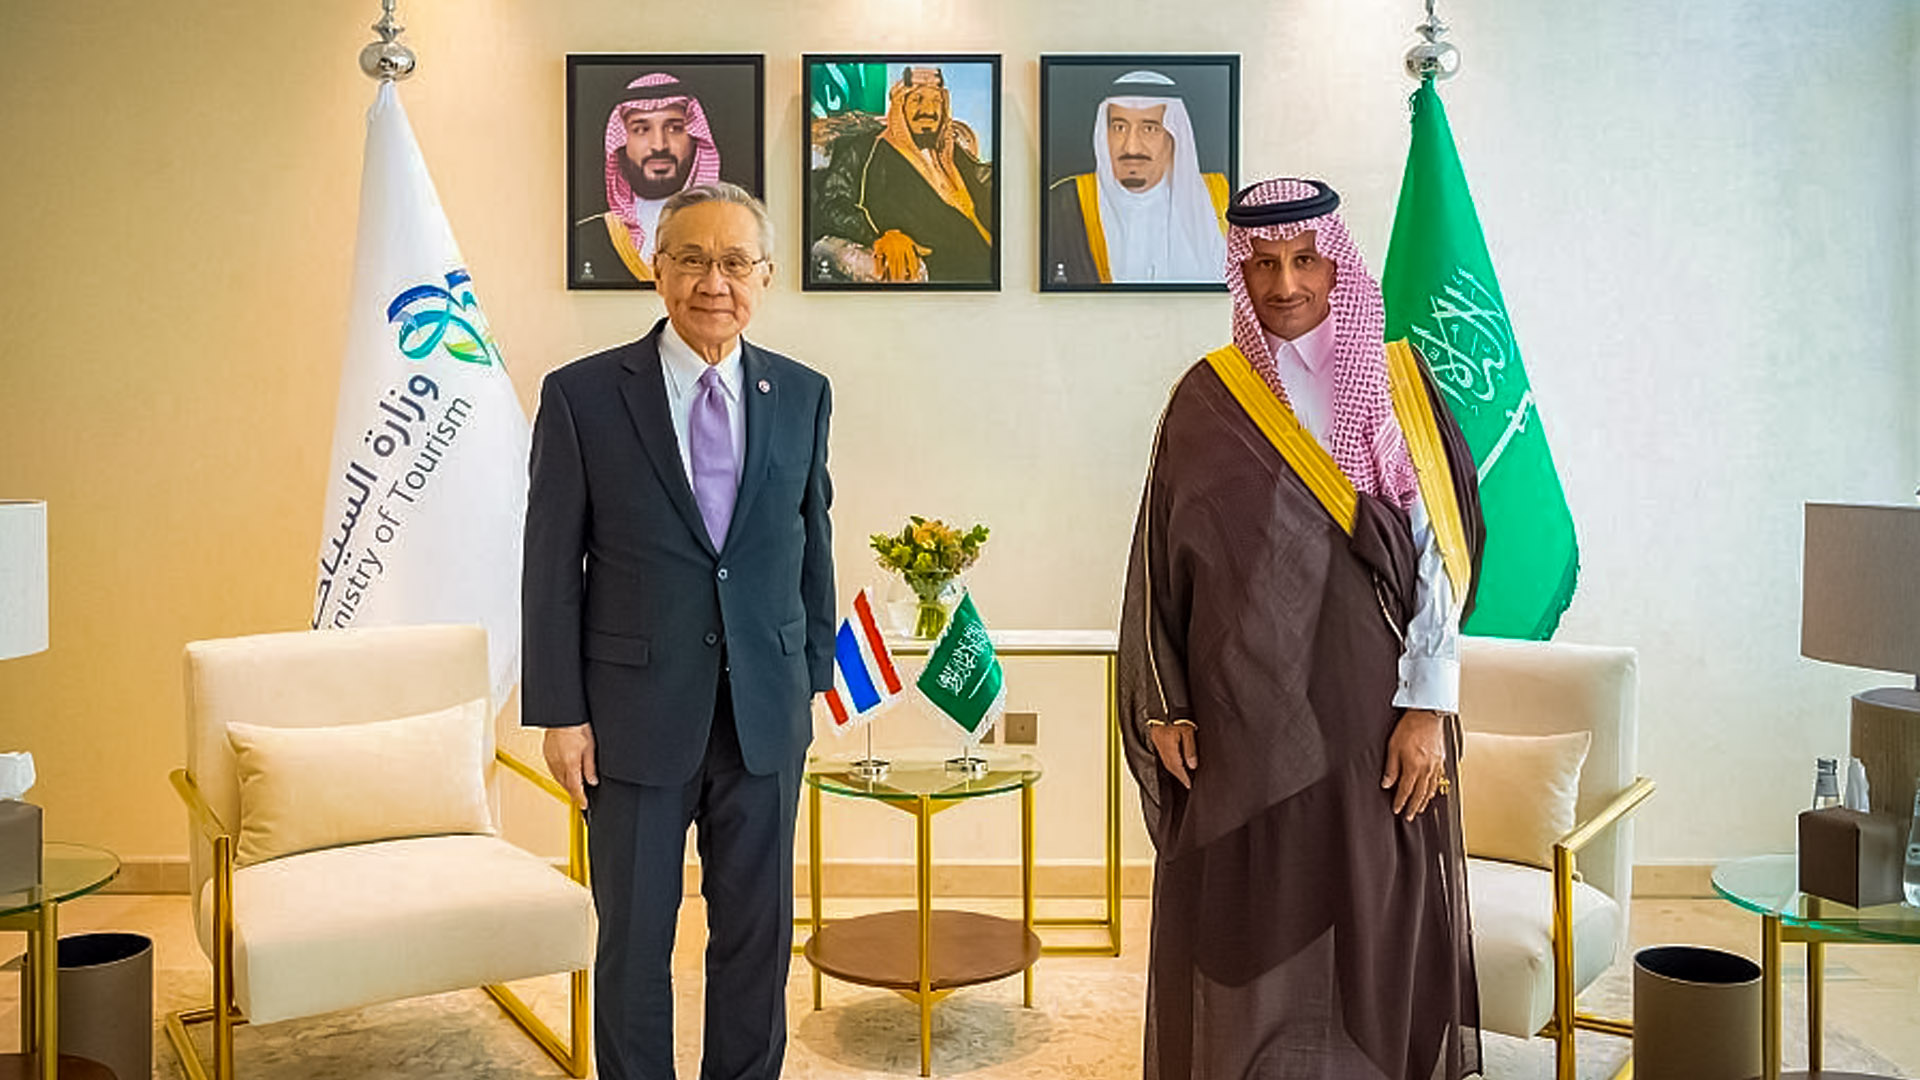 Deputy Prime Minister of Thailand meets with Saudi Minister of Tourism